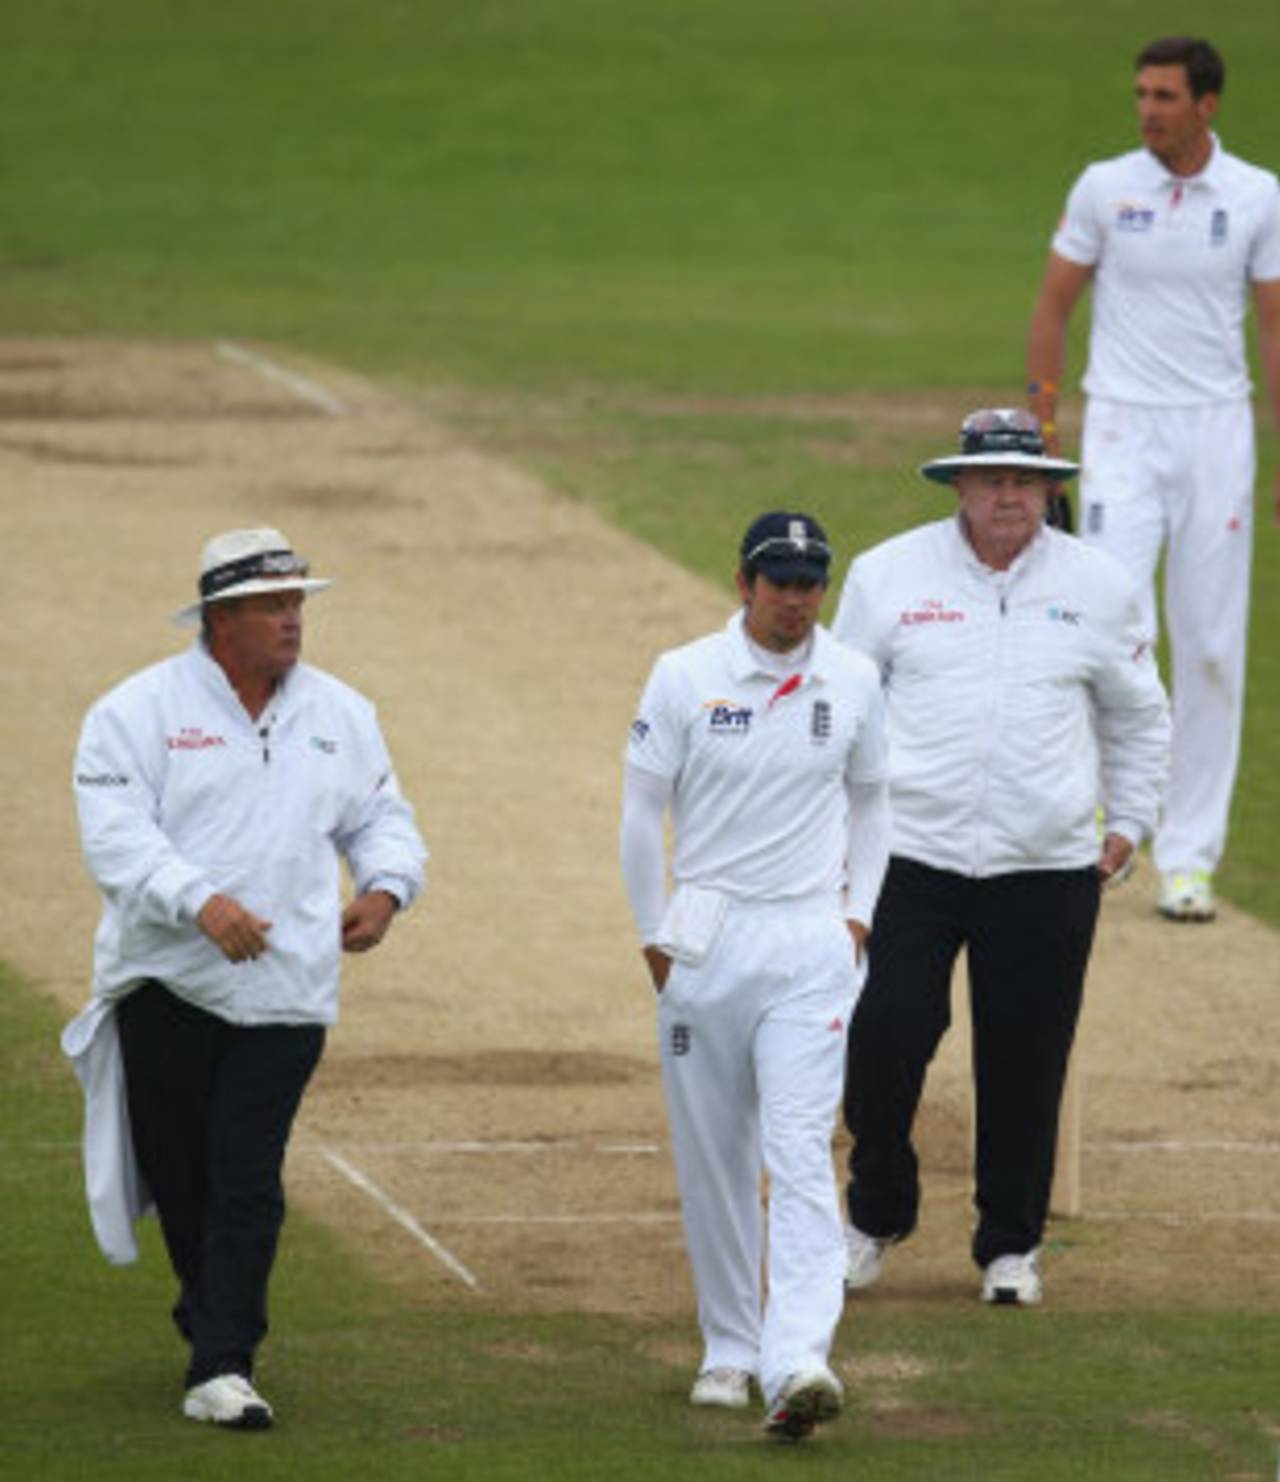 Alastair Cook leads his team off after a word with Marais Erasmus and Steve Davis, England v New Zealand, 2nd Investec Test, Headingley, 5th day, May 28, 2013